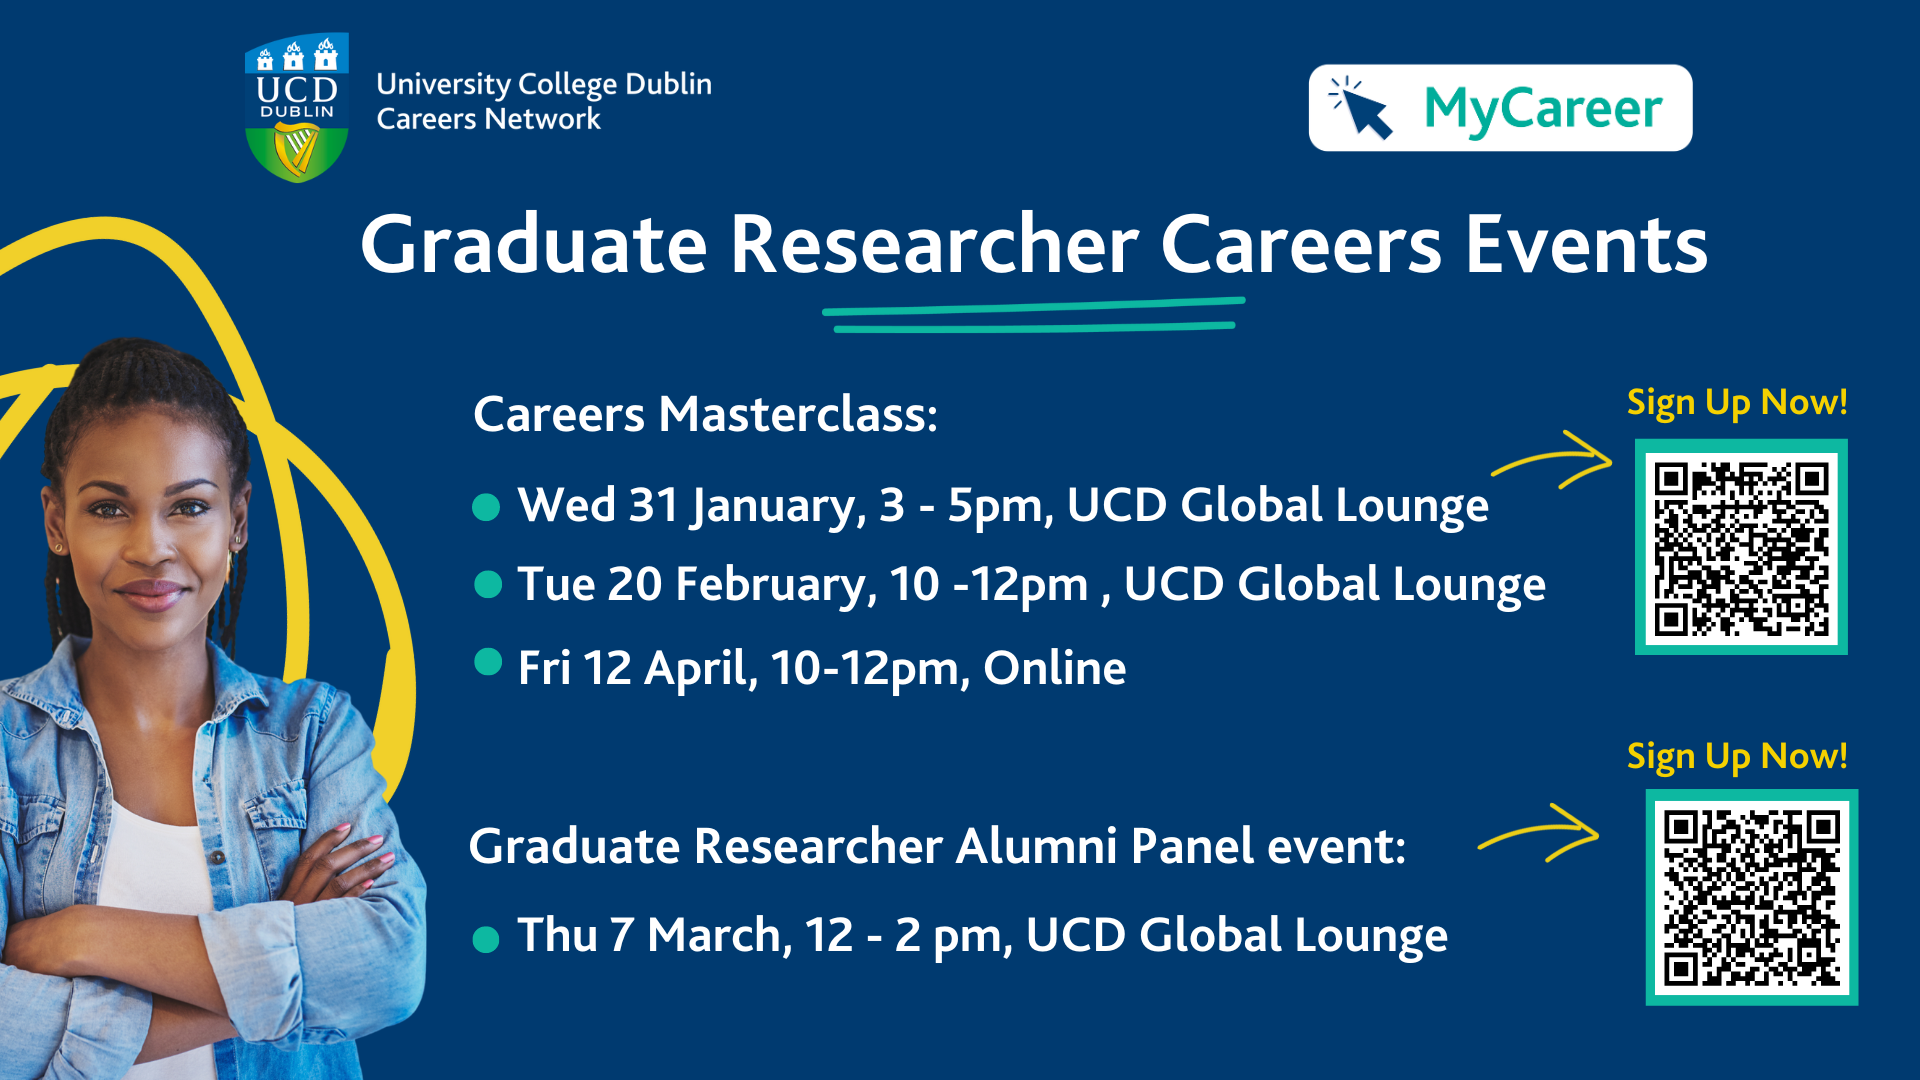 Careers Masterclasses for Graduate Research Students